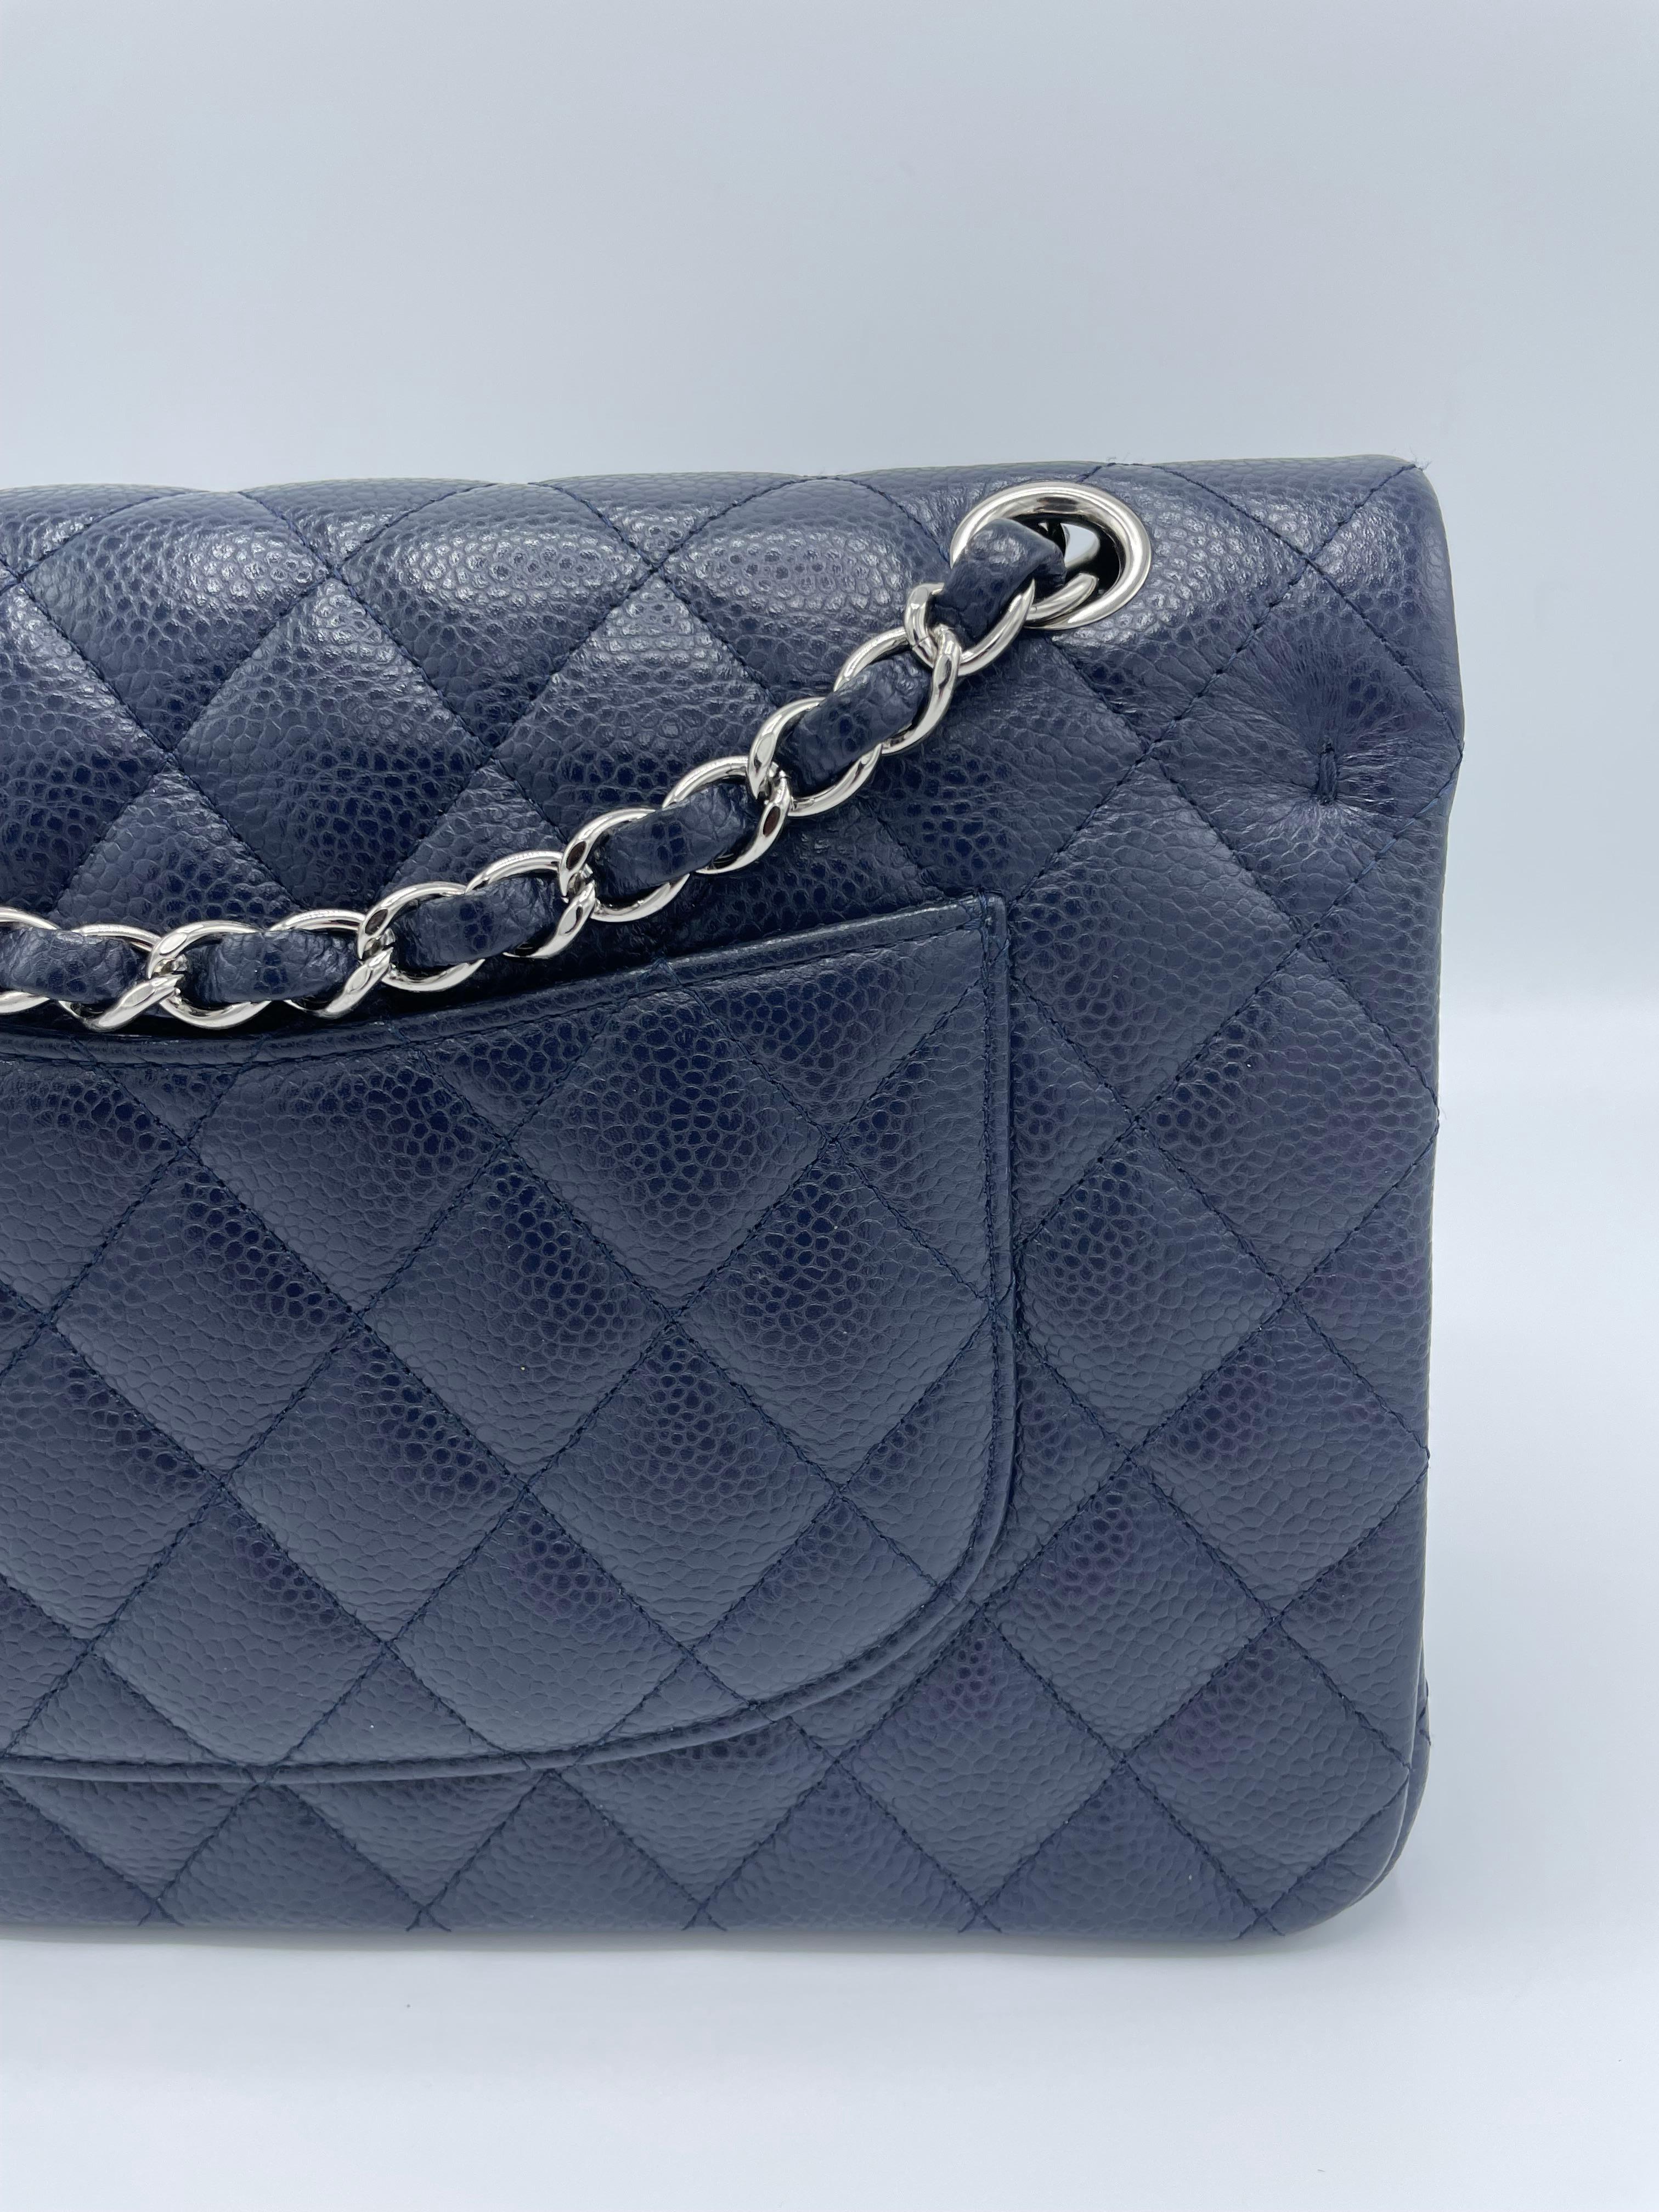 CHANEL Caviar Quilted Medium Double Flap Wallet in Navy. This classic flap bag is made of navy blue caviar leather that has been diamond quilted. It features leather shoulder straps with polished silver chain links strung through them, an external